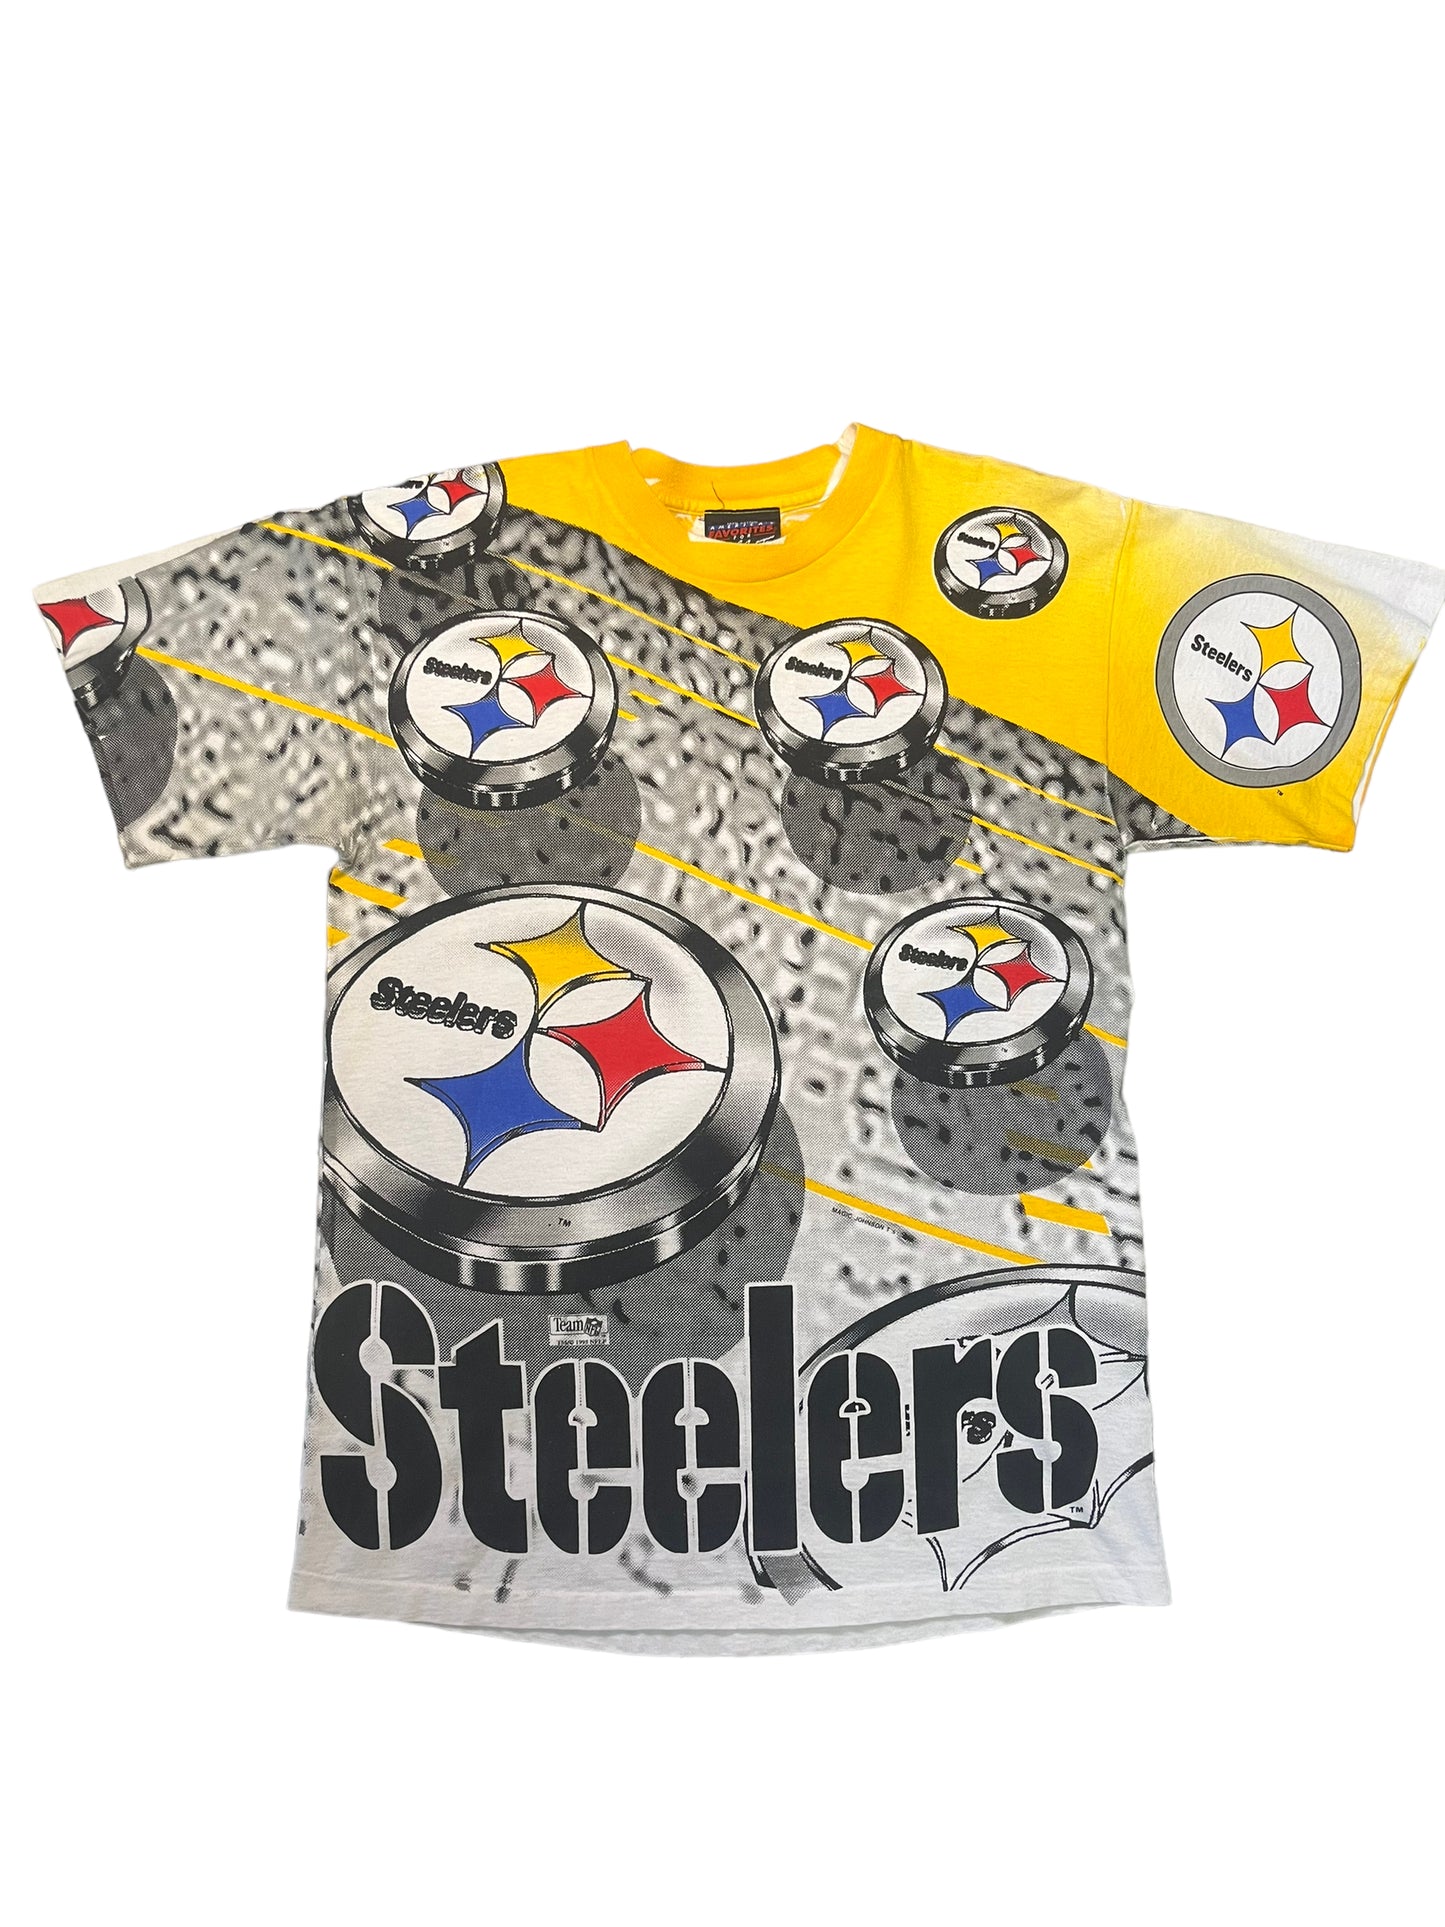 (L) 1995 Steelers All Over Print Tee